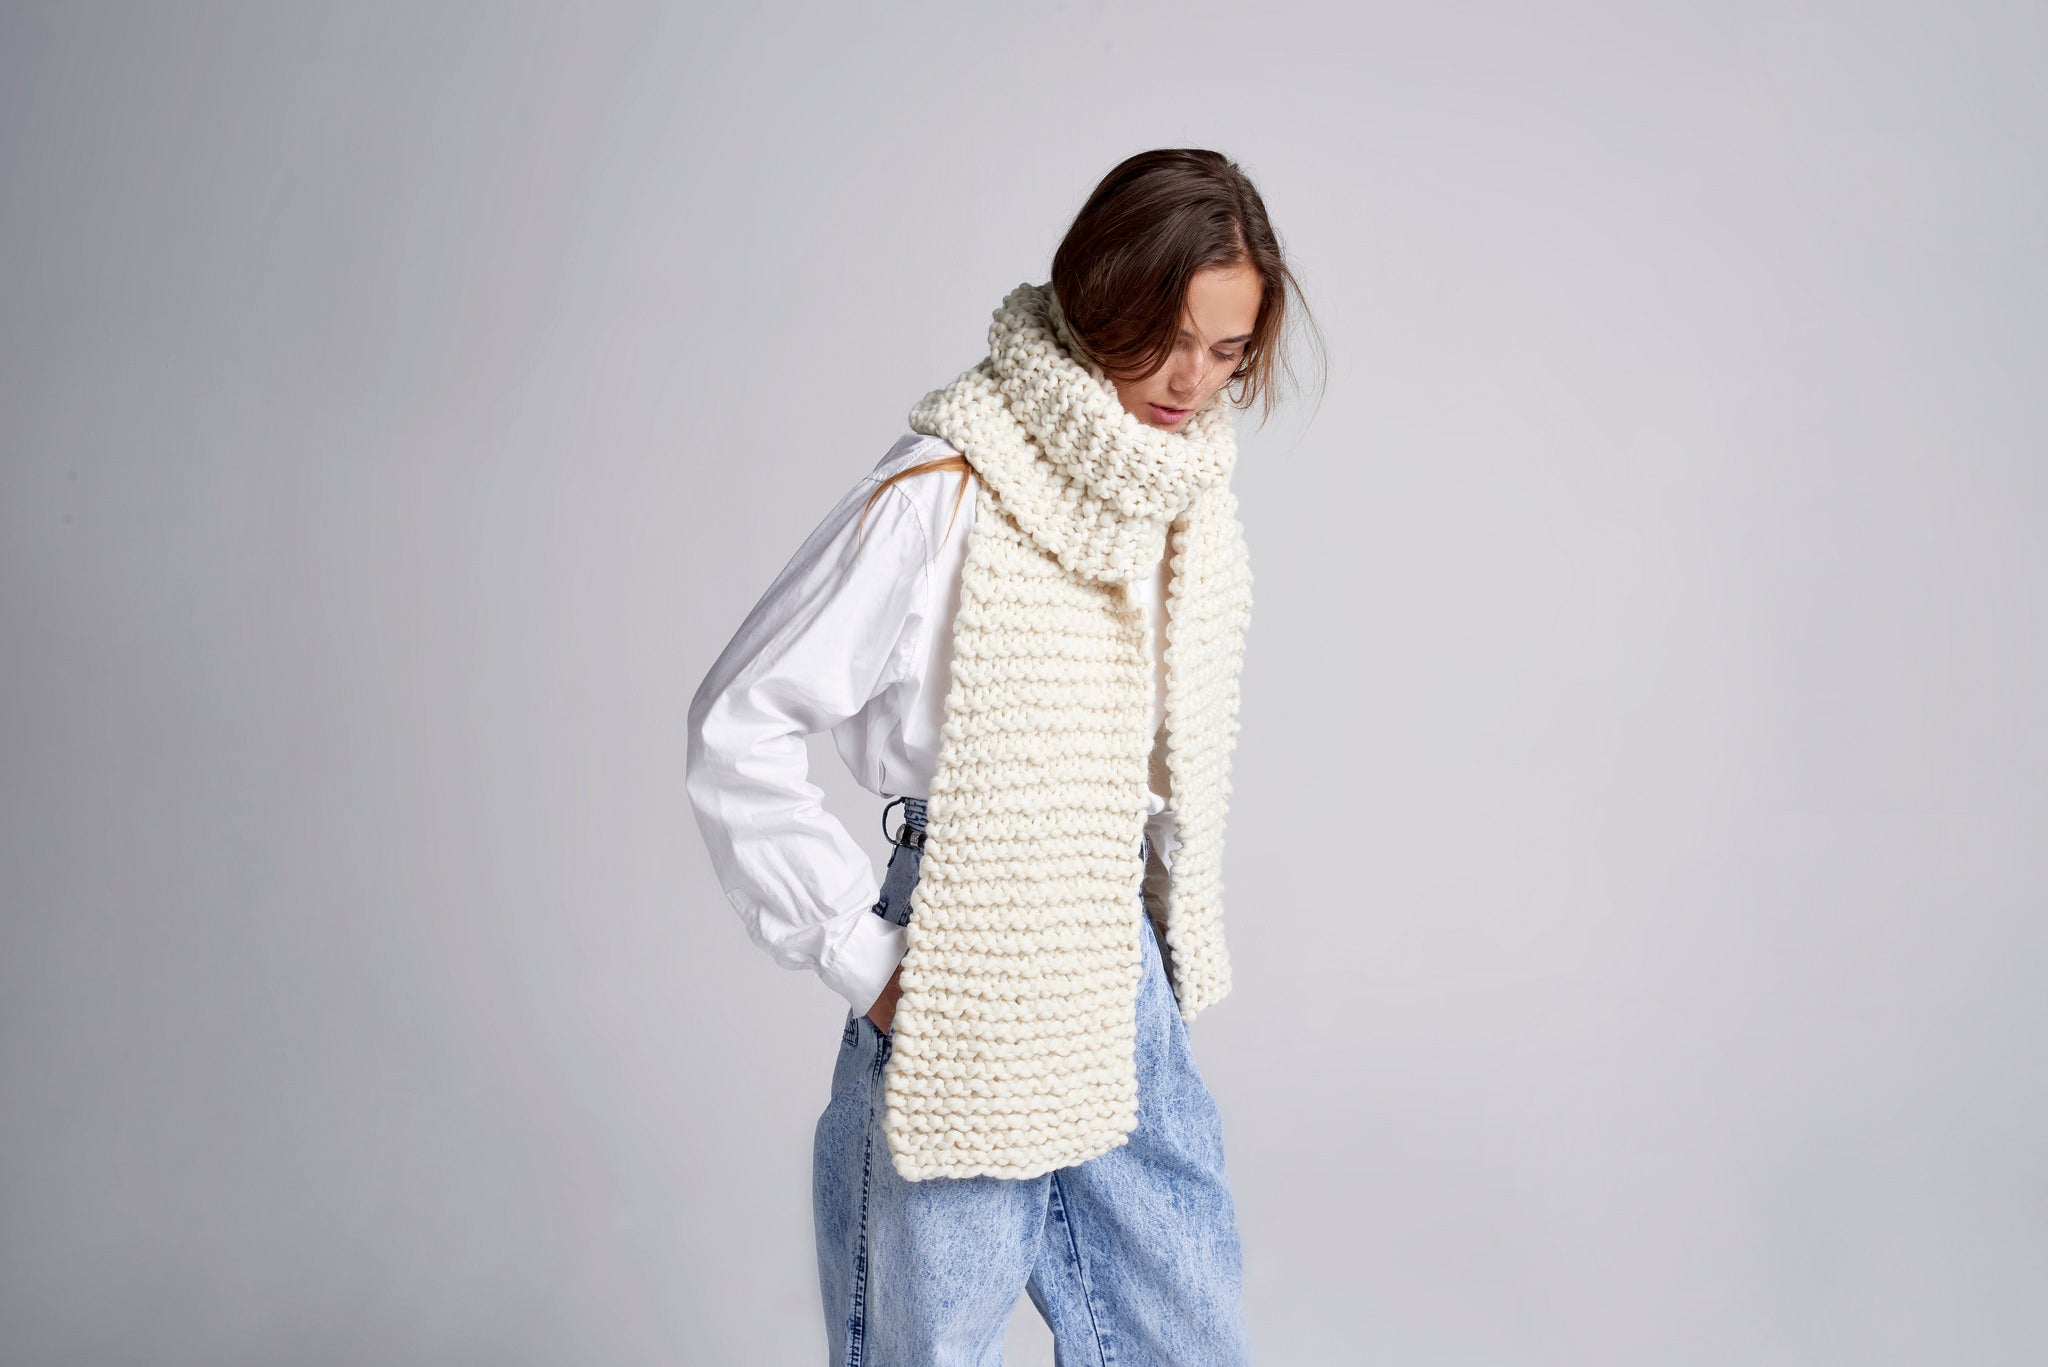 Wool and The Gang - Everything Changes Scarf - Beginner Knitting Kit